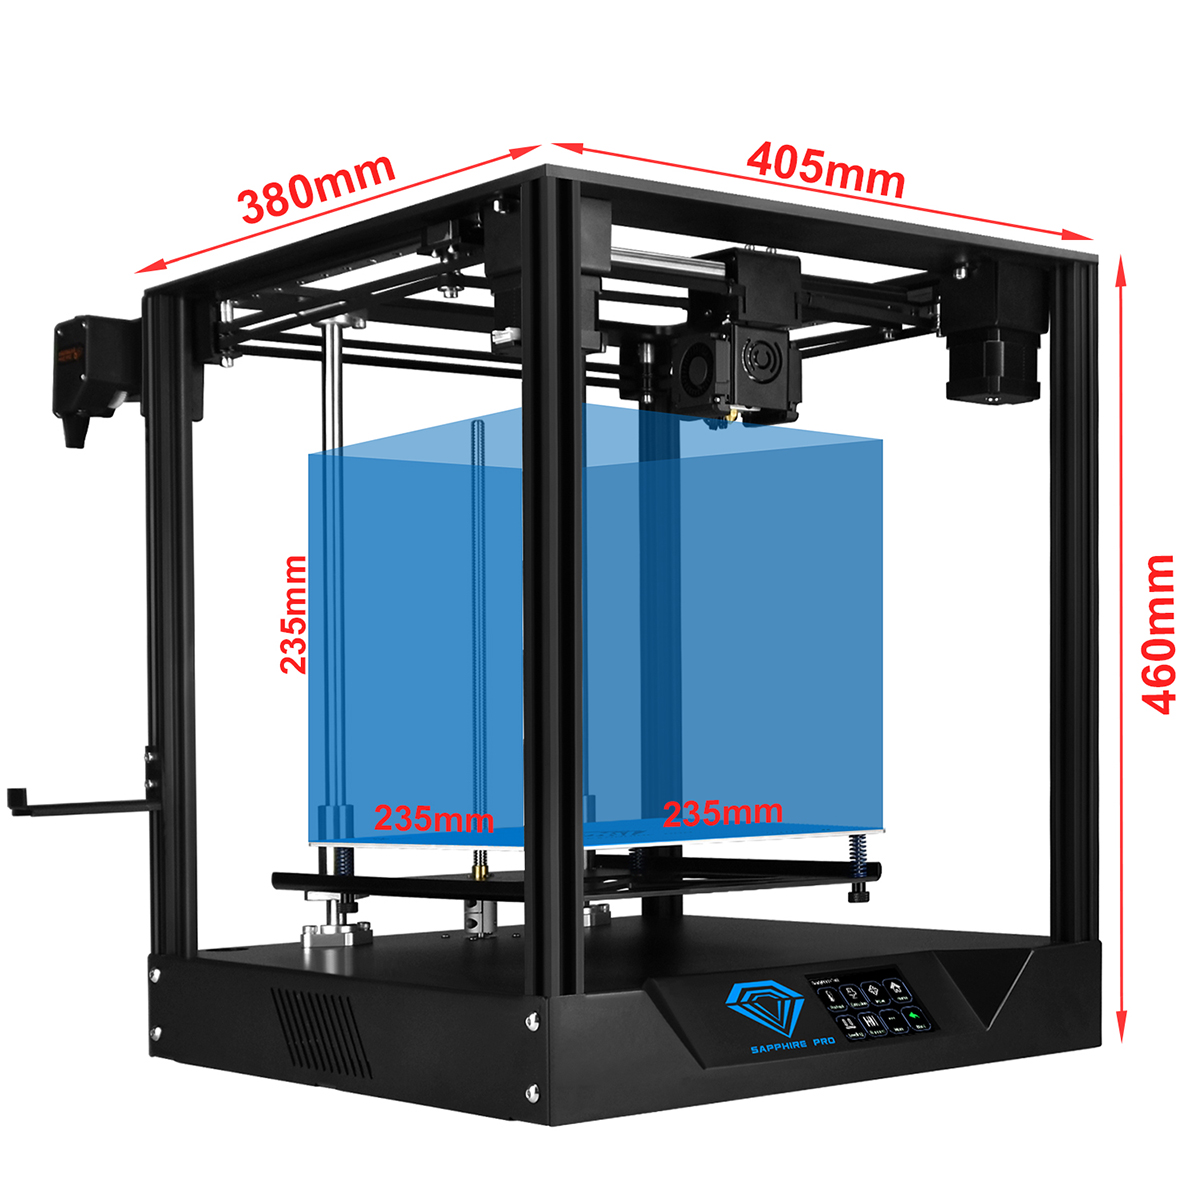 TWO TREES® Sapphire Pro CoreXY DIY 3D Printer Kit 235*235*235mm Printing Size With Dual Drive BMG Extruder / X-axis&Y-axis Linear Guide / Power Re 39